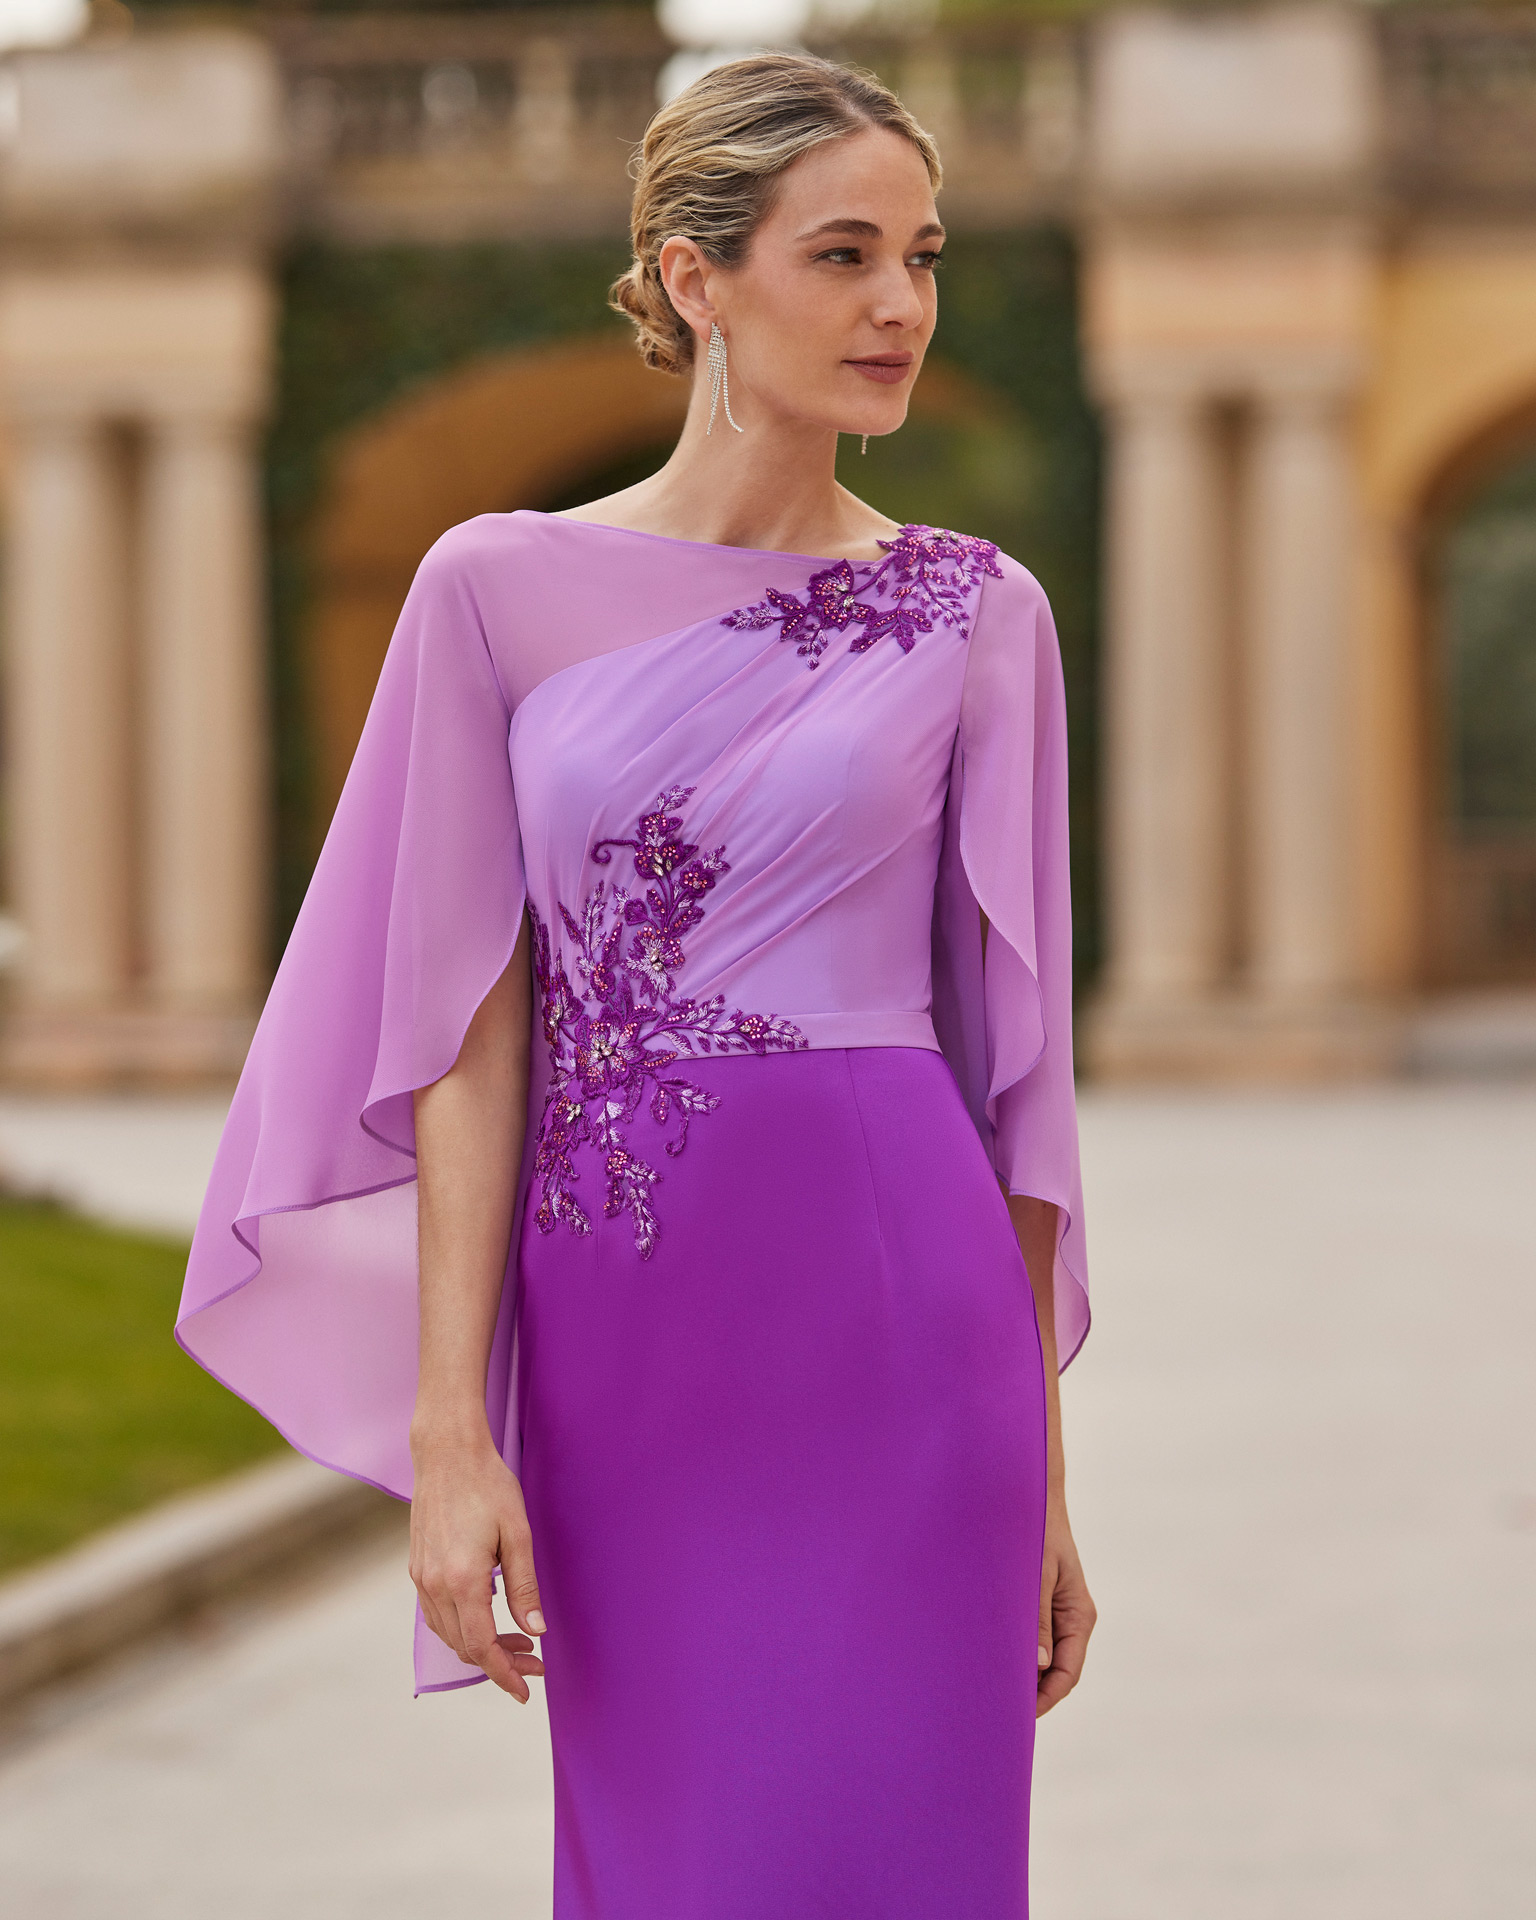 Flowing long guest dress. Crafted with sateen crêpe with beadwork lace details. With round neckline and cape sleeves. Couture Club outfit for parties and events. MARFIL_BARCELONA.